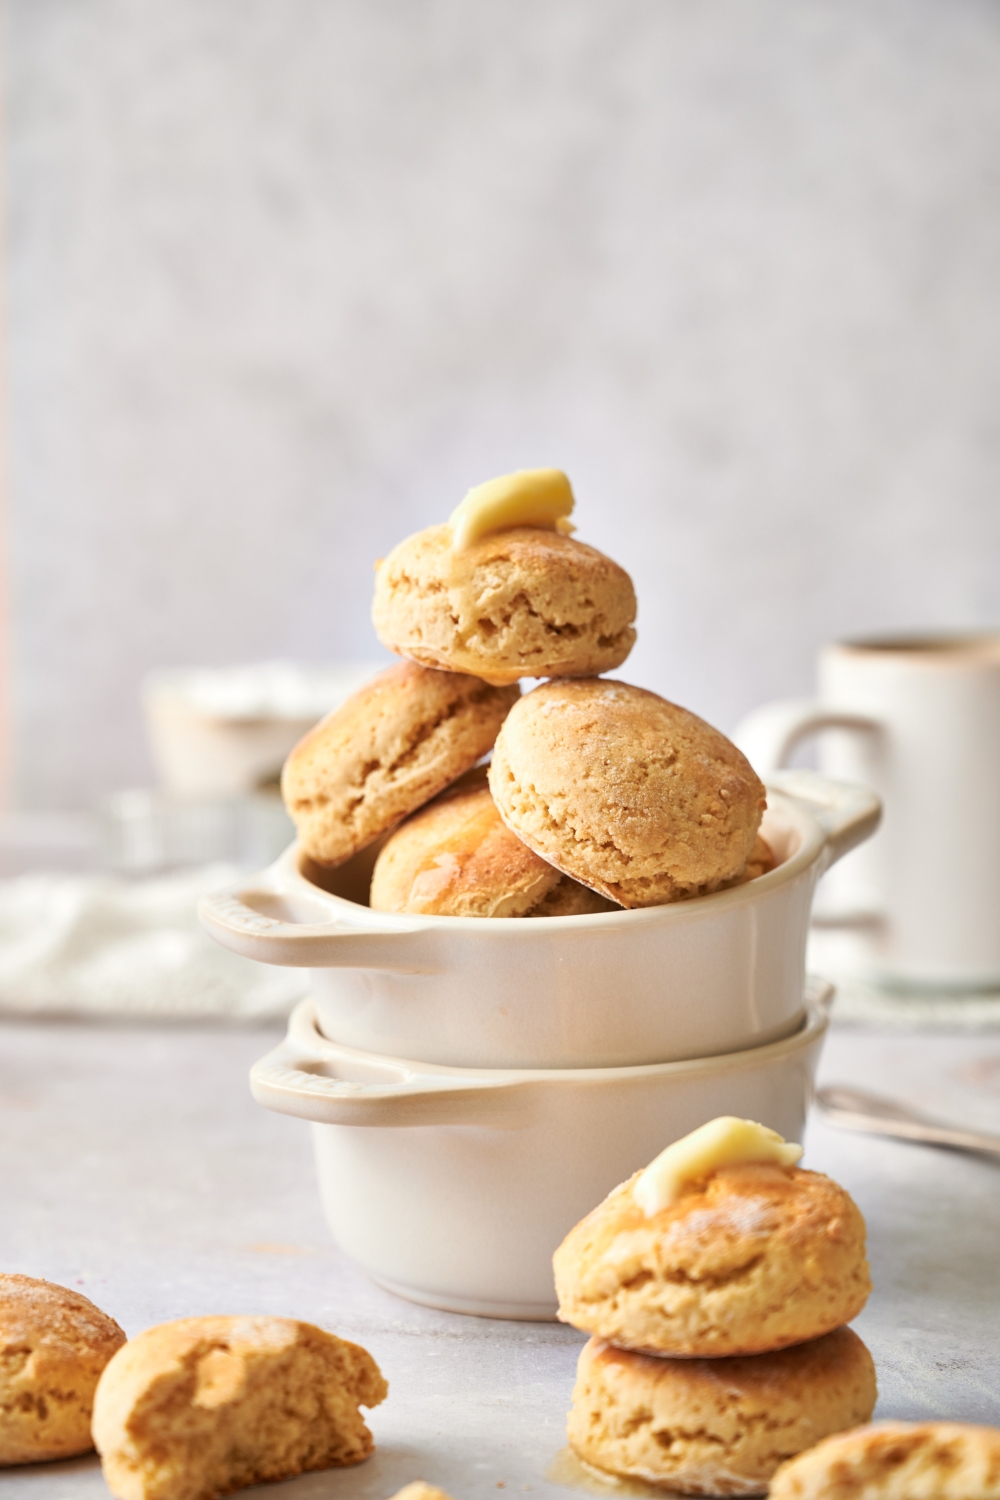 Two ramekins stand stacked on top of each other. The top ramekin is full of golden brown biscuits. The topmost biscuit has a pat of butter on top of it.